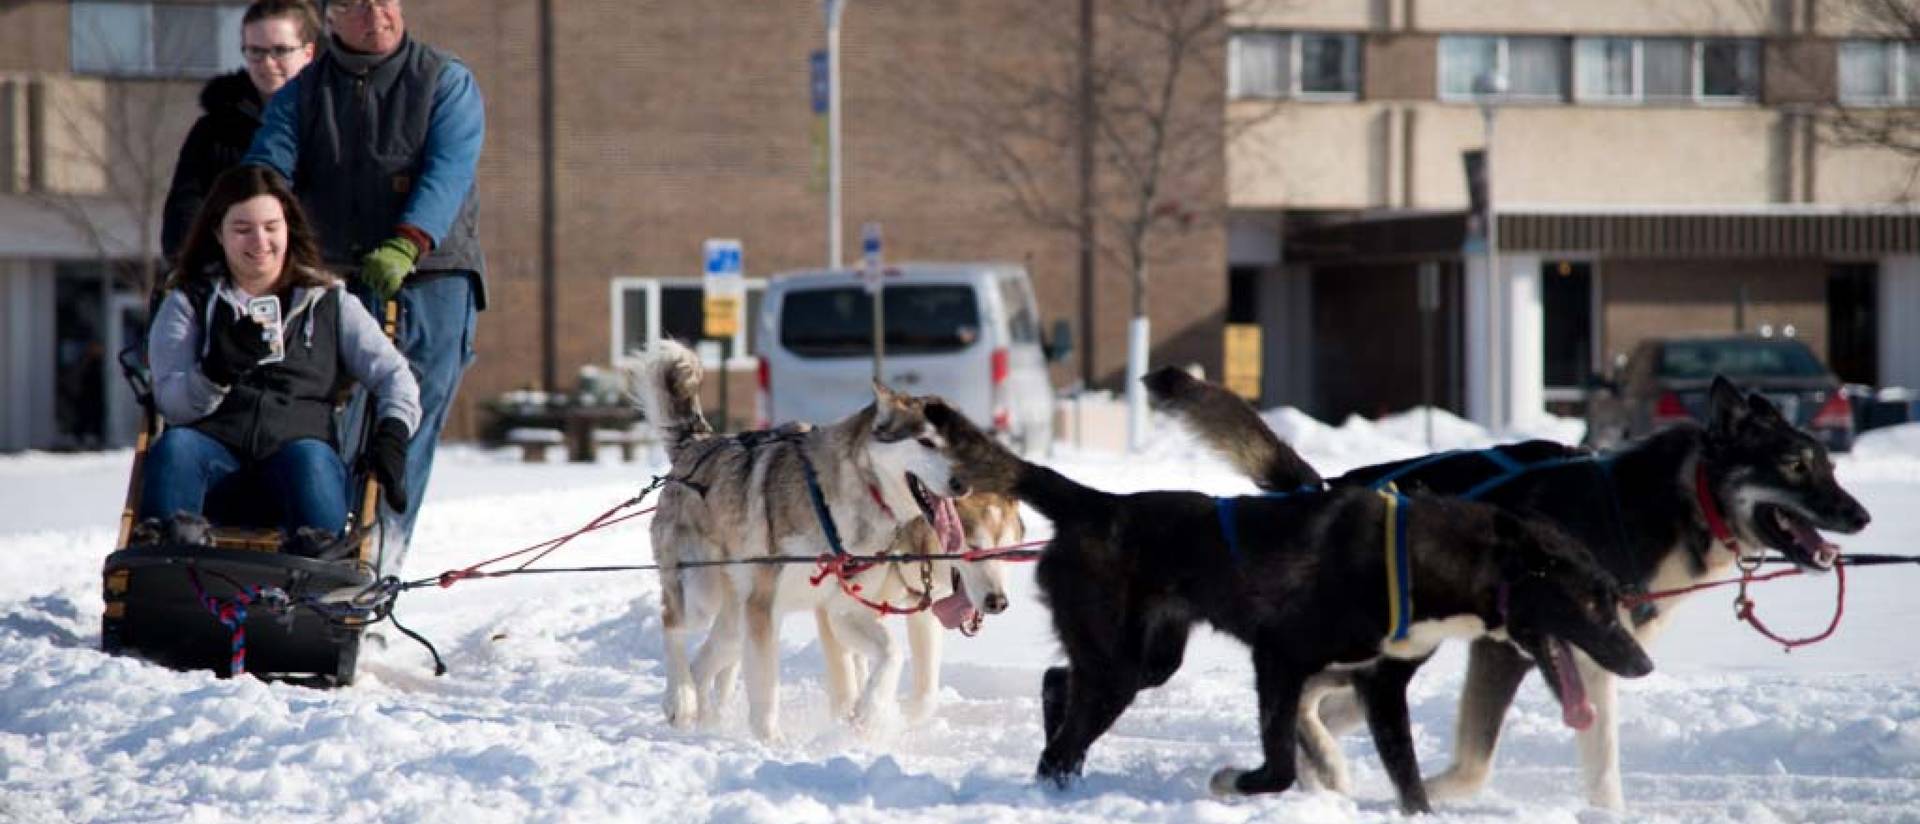 Sled dogs by residence halls for Winter Carnival